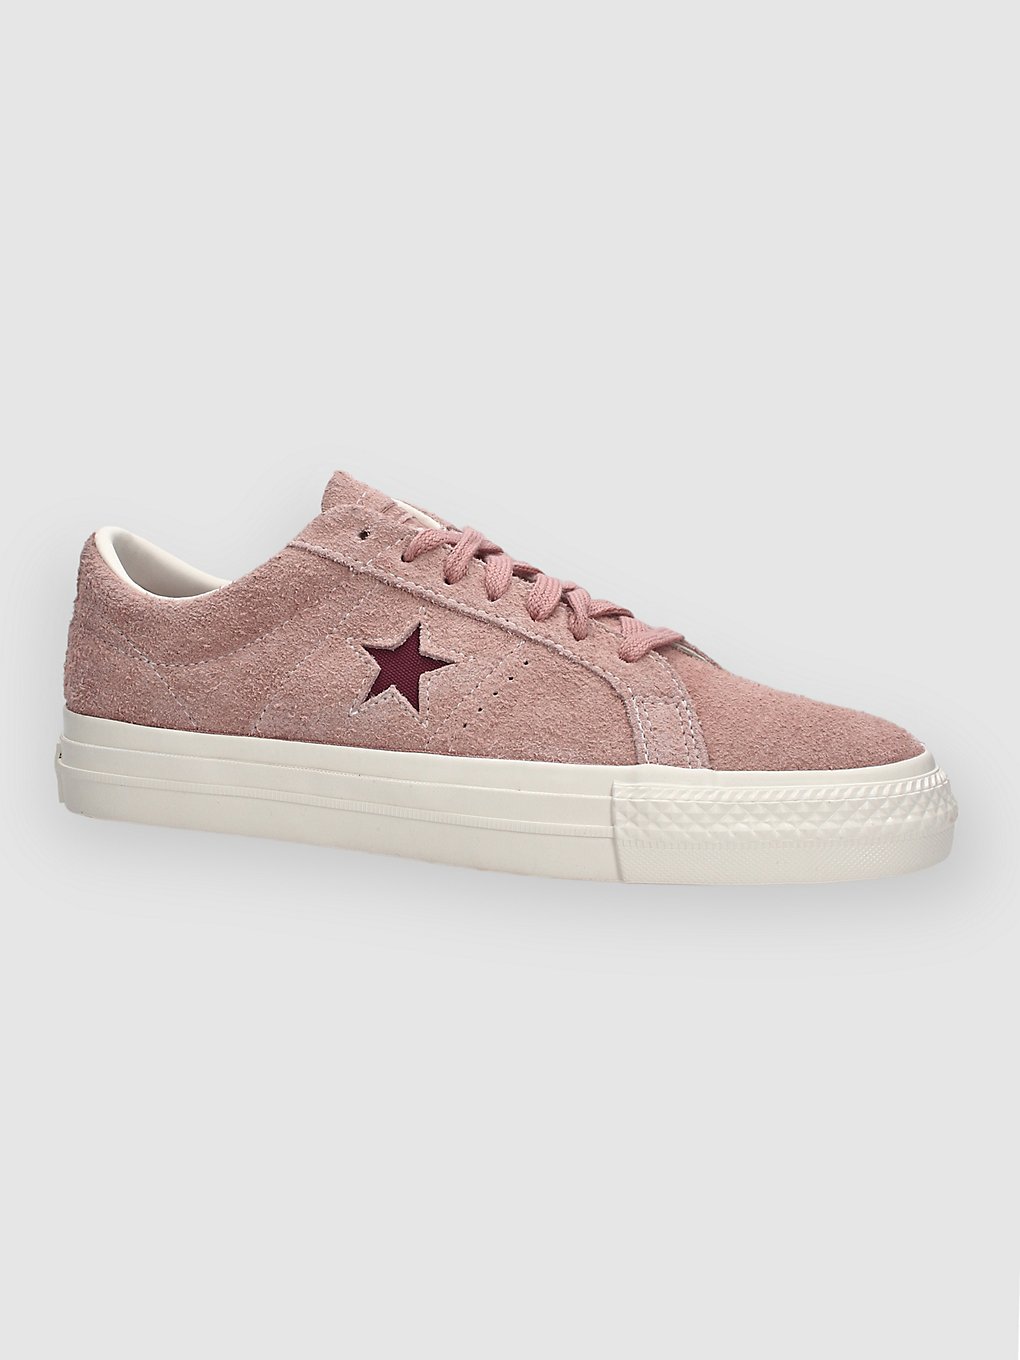 Converse One Star Pro Vintage Suede Chaussures de skate rose